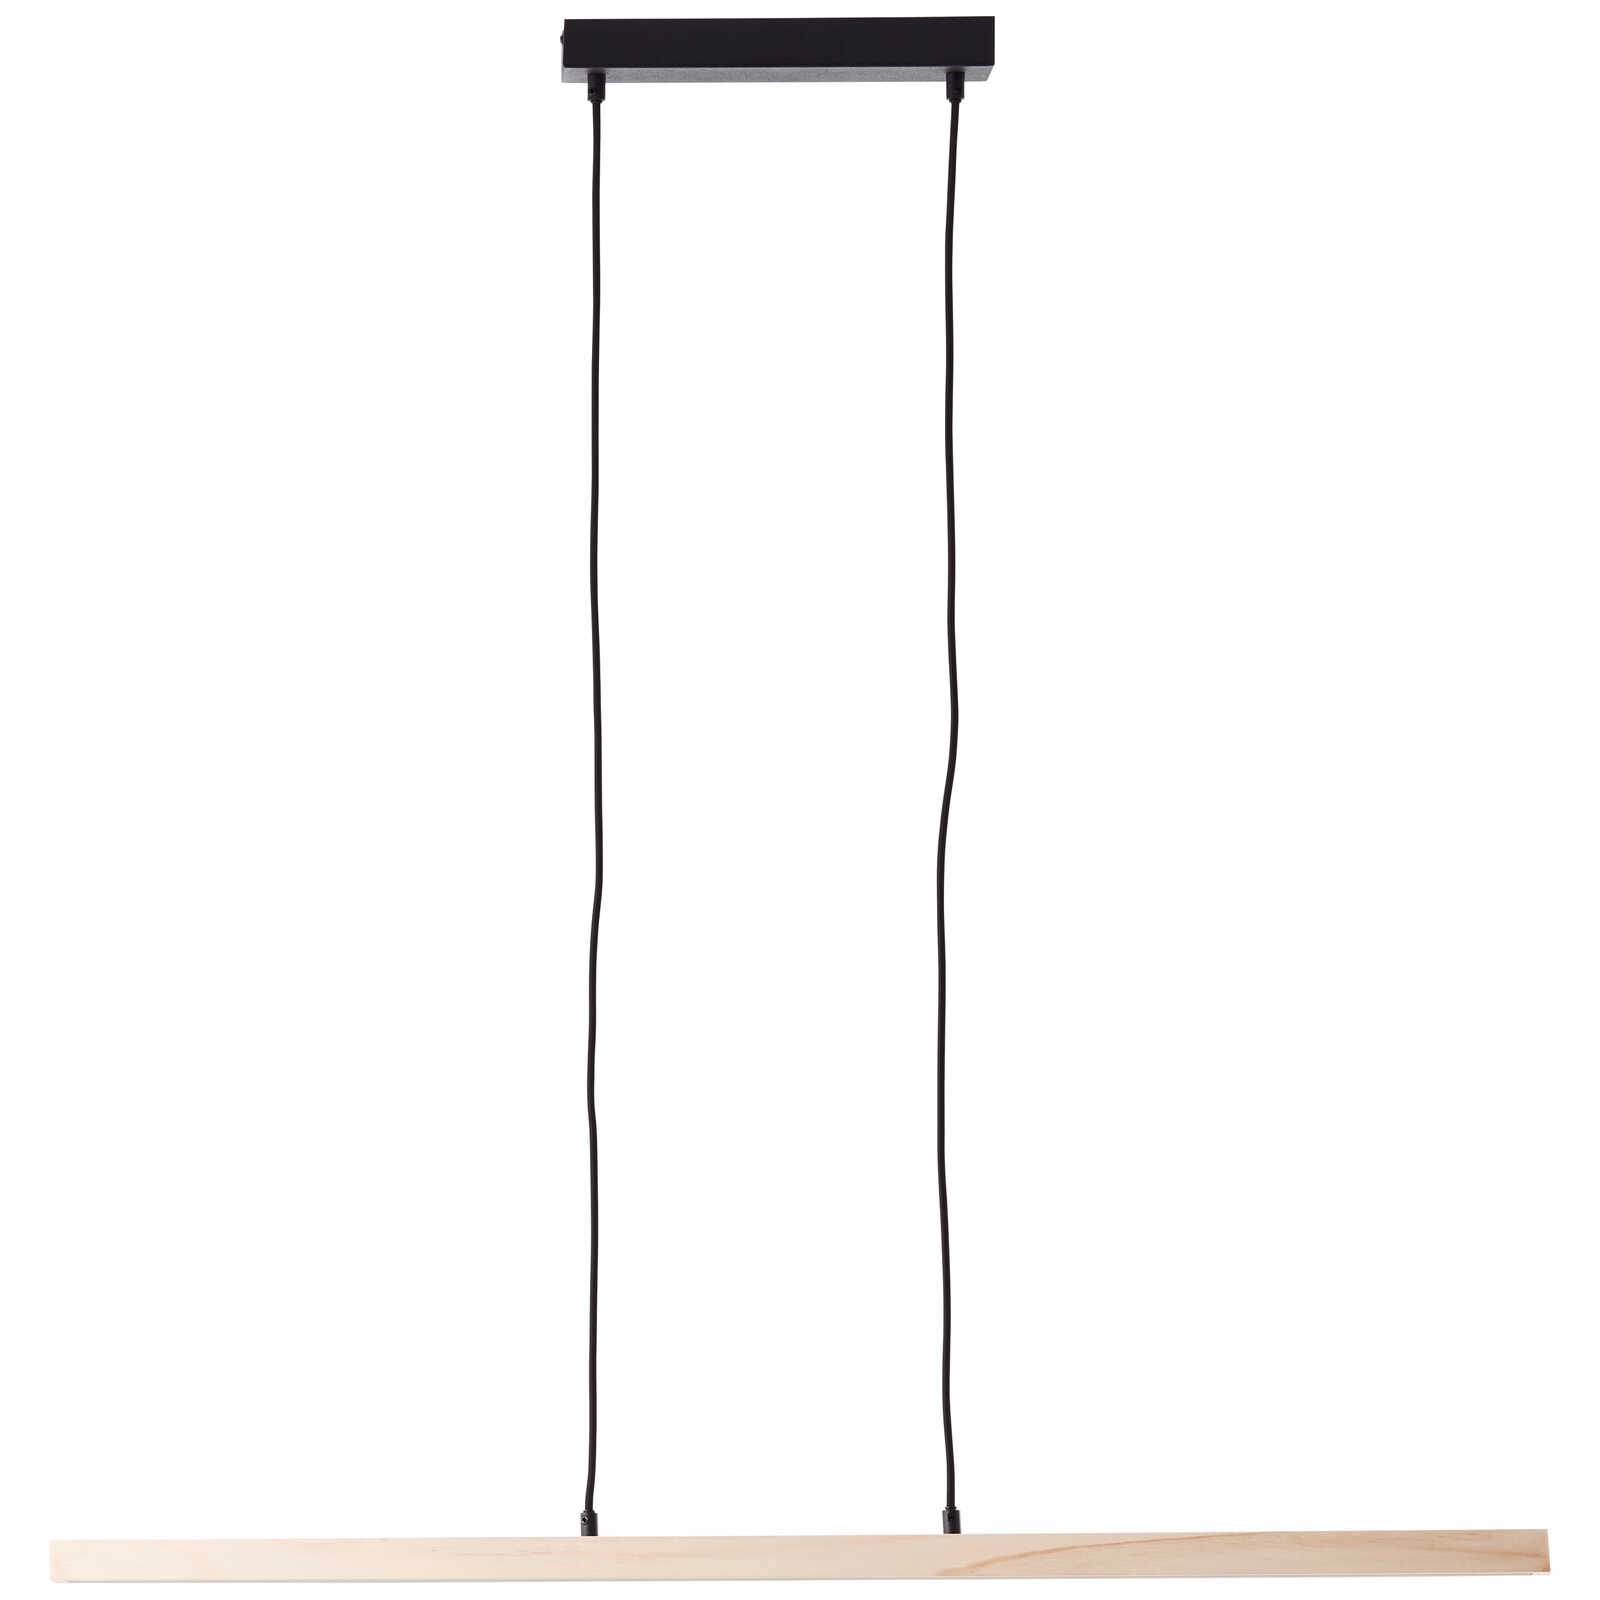             Wooden pendant light - Anabelle 2 - Brown
        